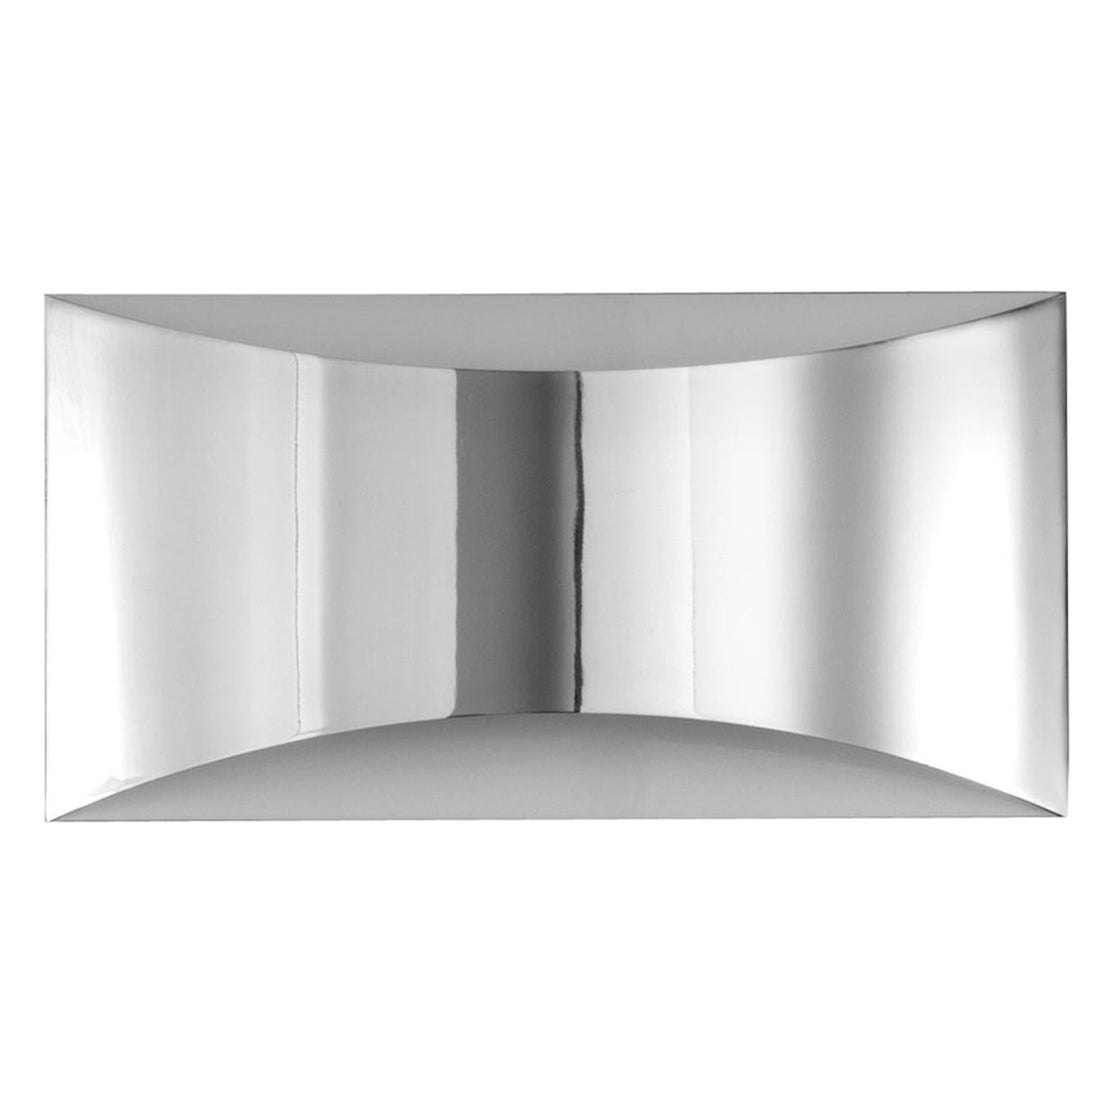 Design Studio 63 Wall Lamp 'Kelly' Chromium-Plated by Oluce